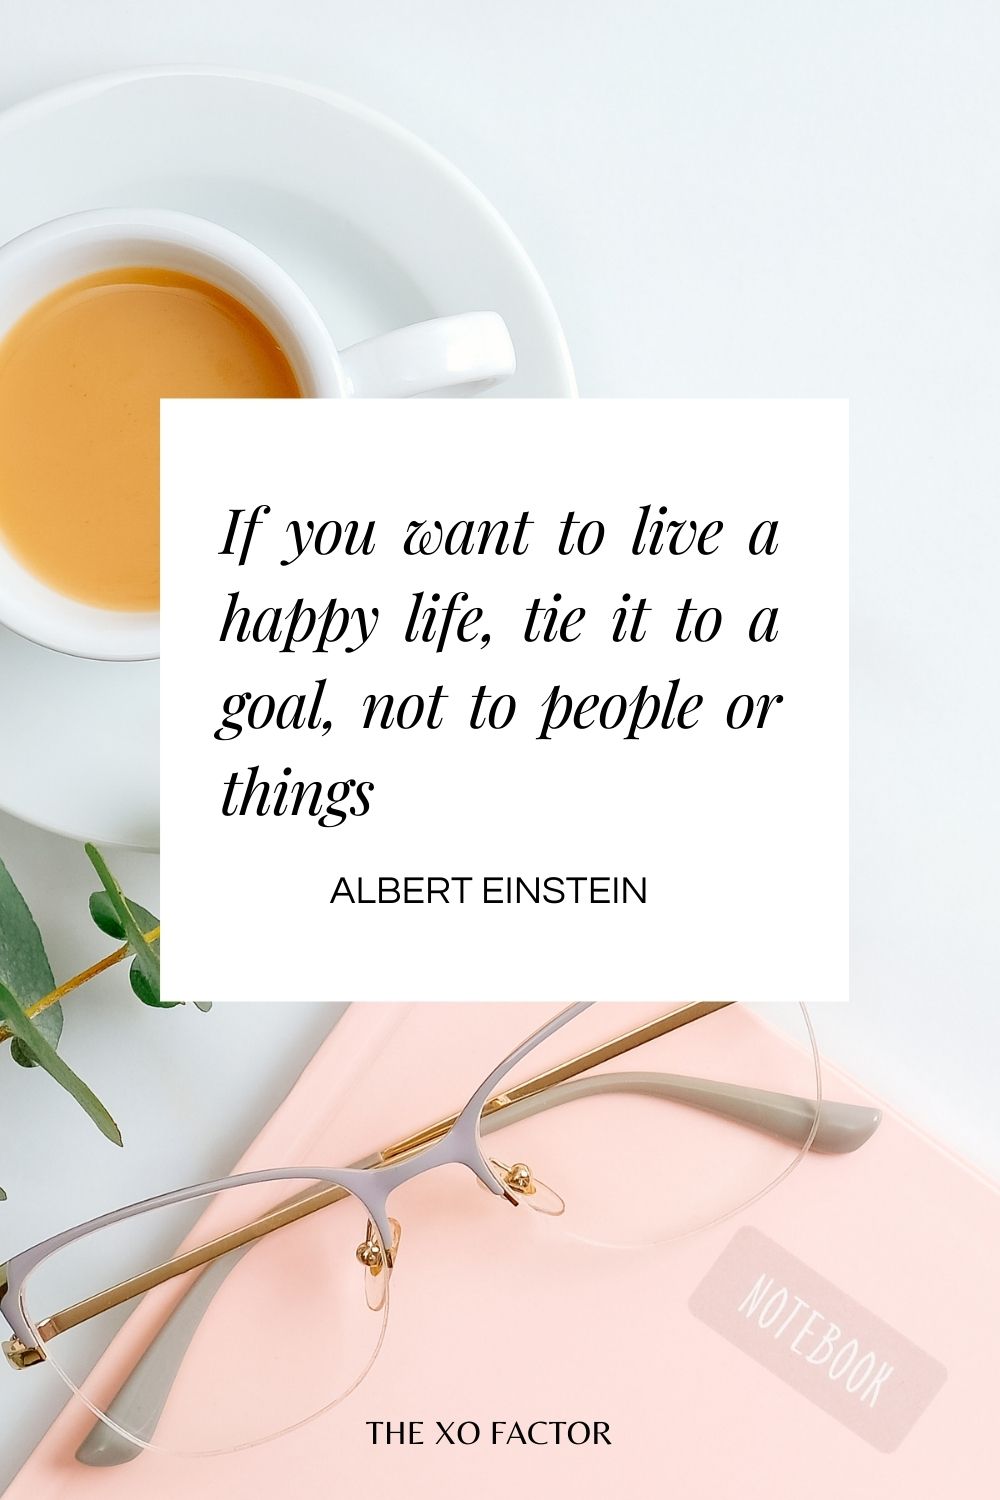 If you want to live a happy life, tie it to a goal, not to people or things.”– Albert Einstein